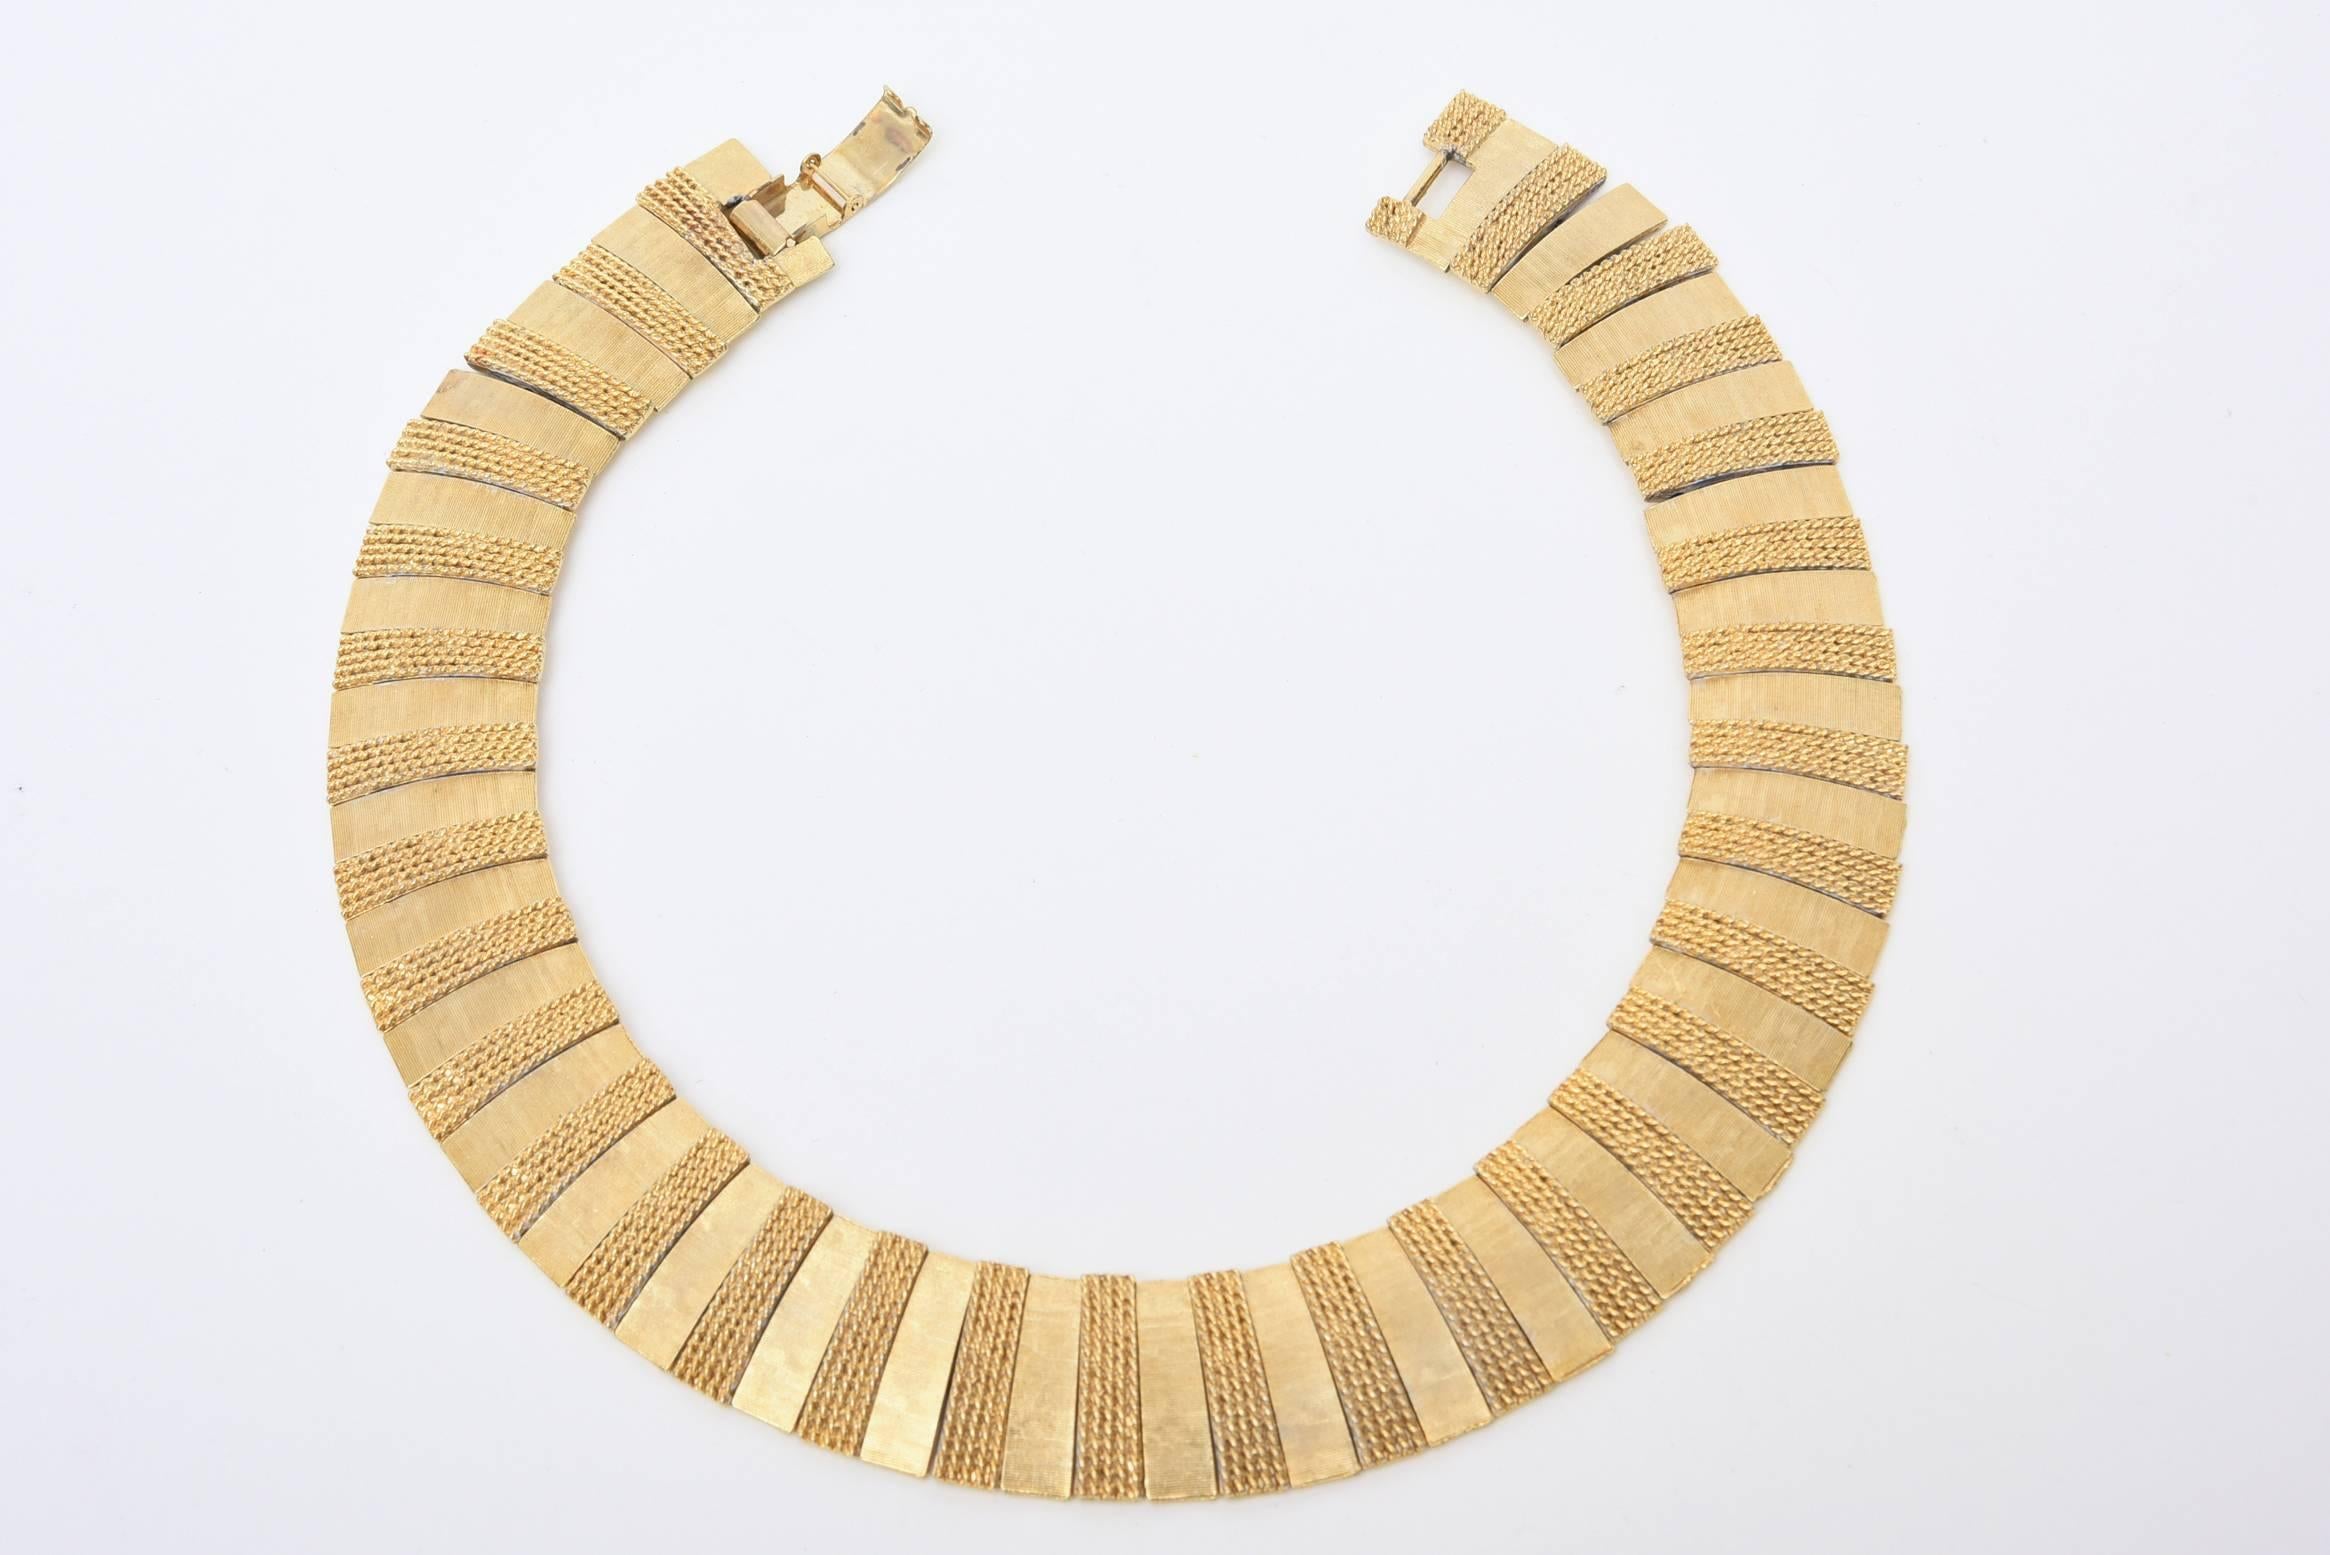 A combination of brushed and woven gold-plated bar makes this vintage collar necklace a stunner. It lays beautifully on the neck and looks like real gold. This is elegant on the neck and can go dressy or casual. This is very rich looking for